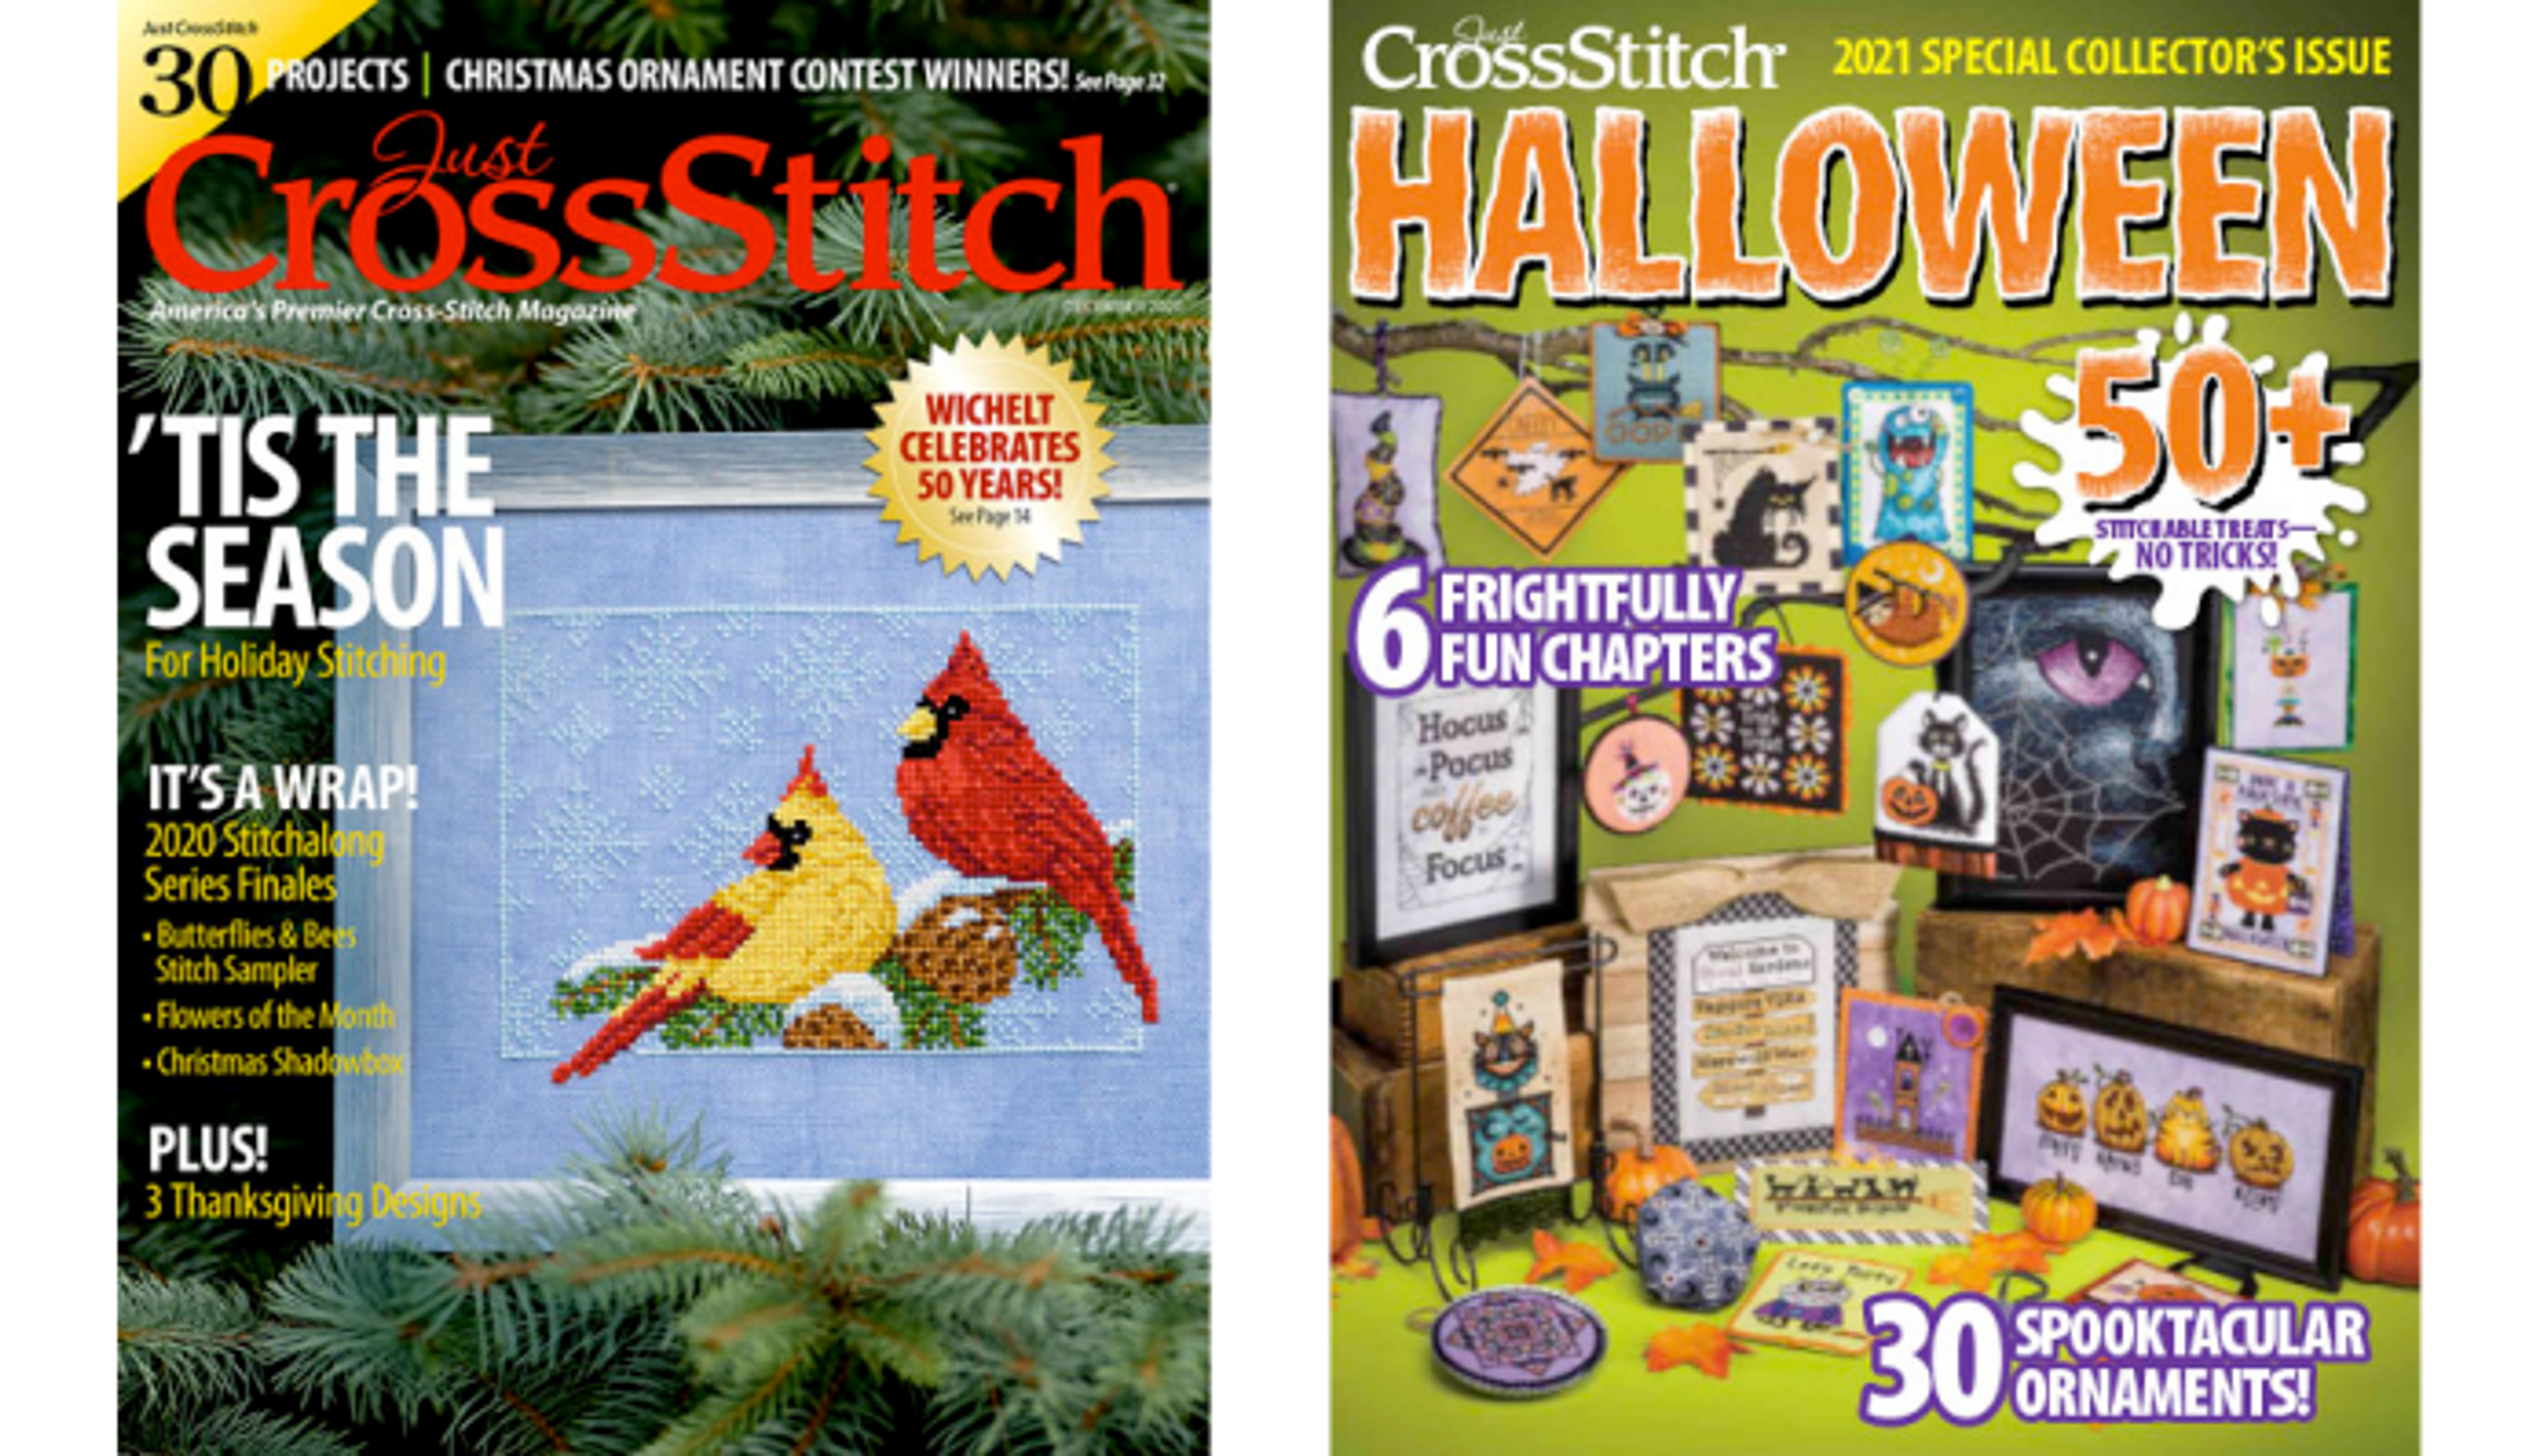 Just CrossStitch Holiday and Halloween magazine covers with my pieces